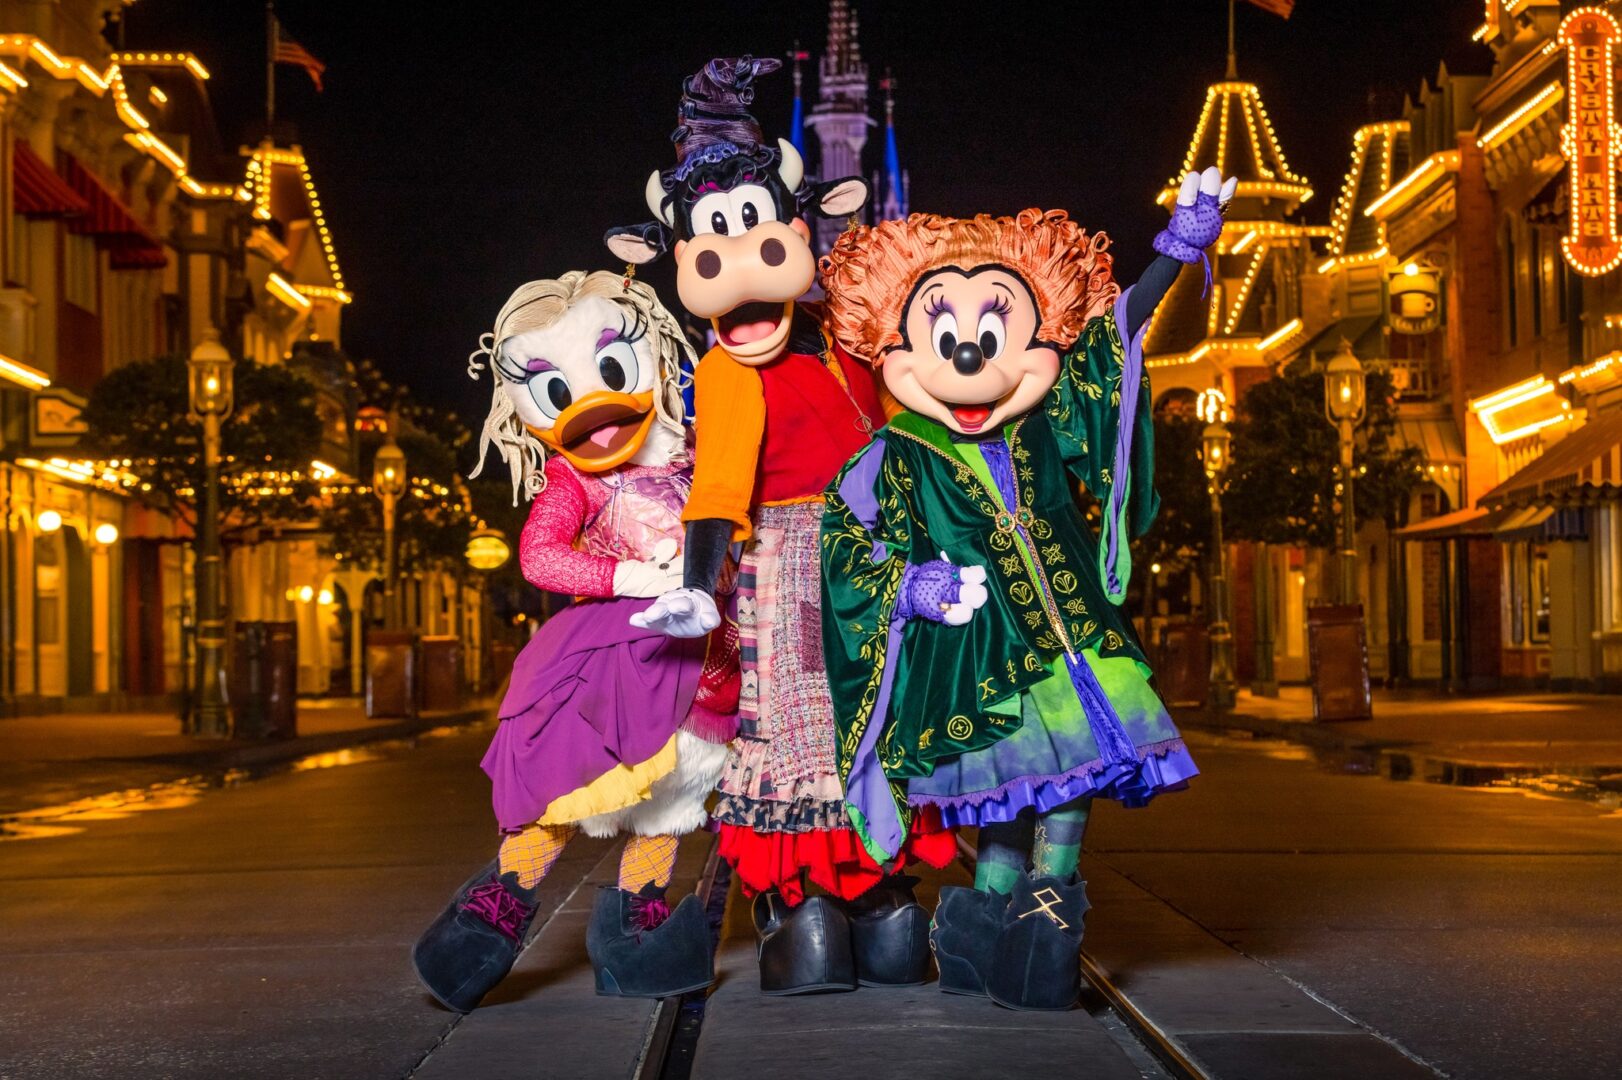 Minnie, Daisy, and Clarabelle dressed as the Sanderson Sisters in Mickey’s “Boo-To-You” Parade